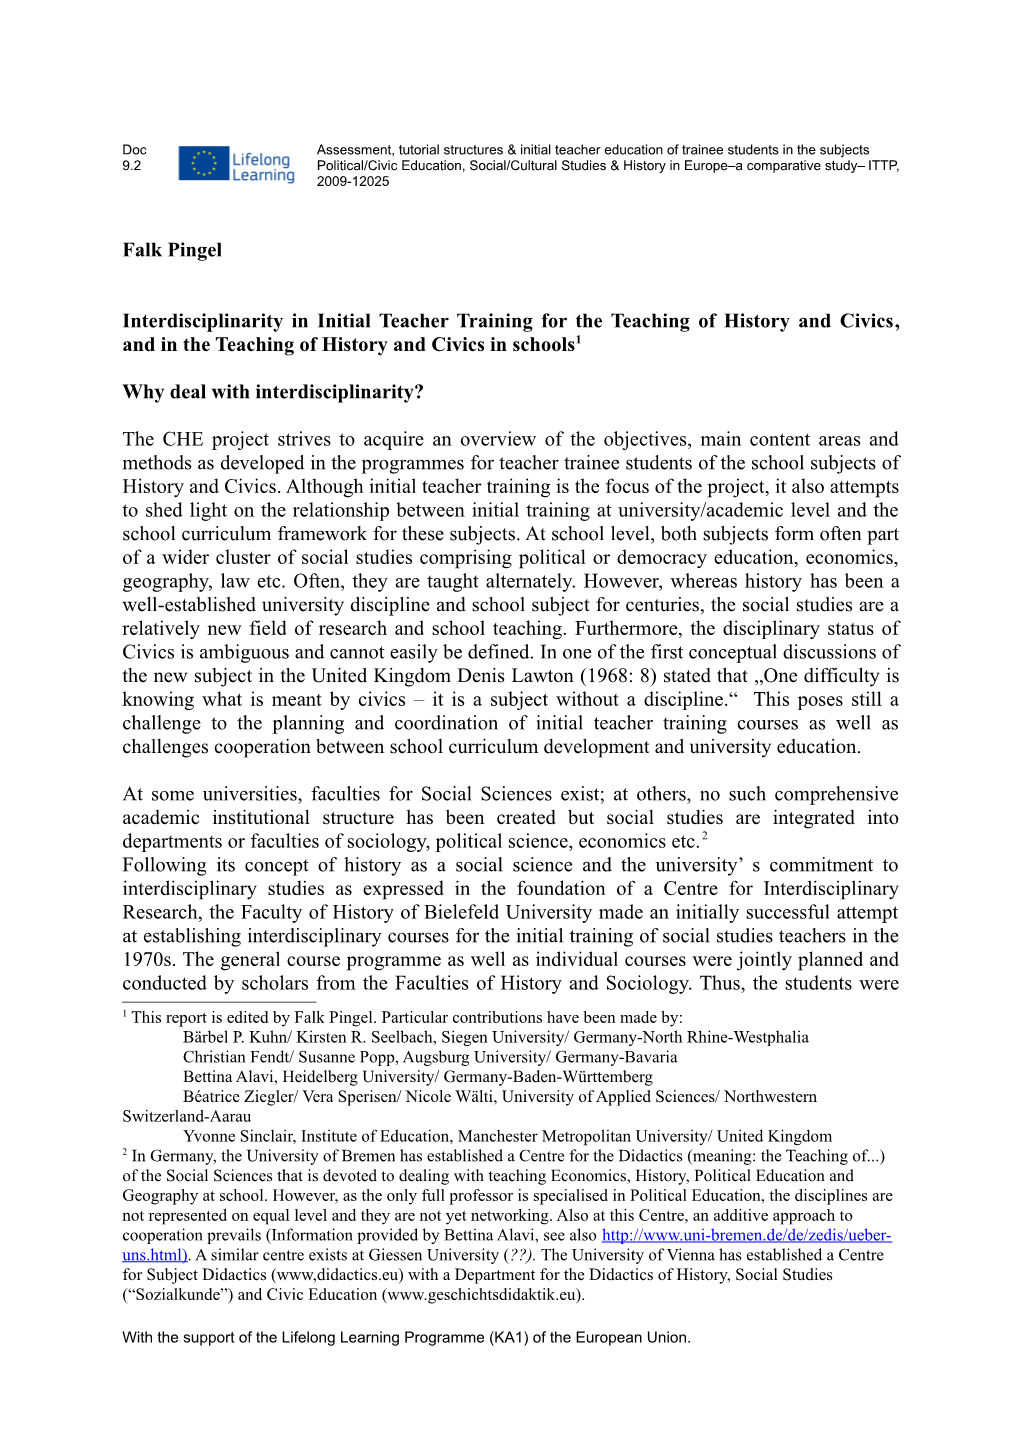 Interdisciplinarity in Initial Teacher Training for the Teaching of History and Civics, and in the Teaching of History and Civics in Schools1